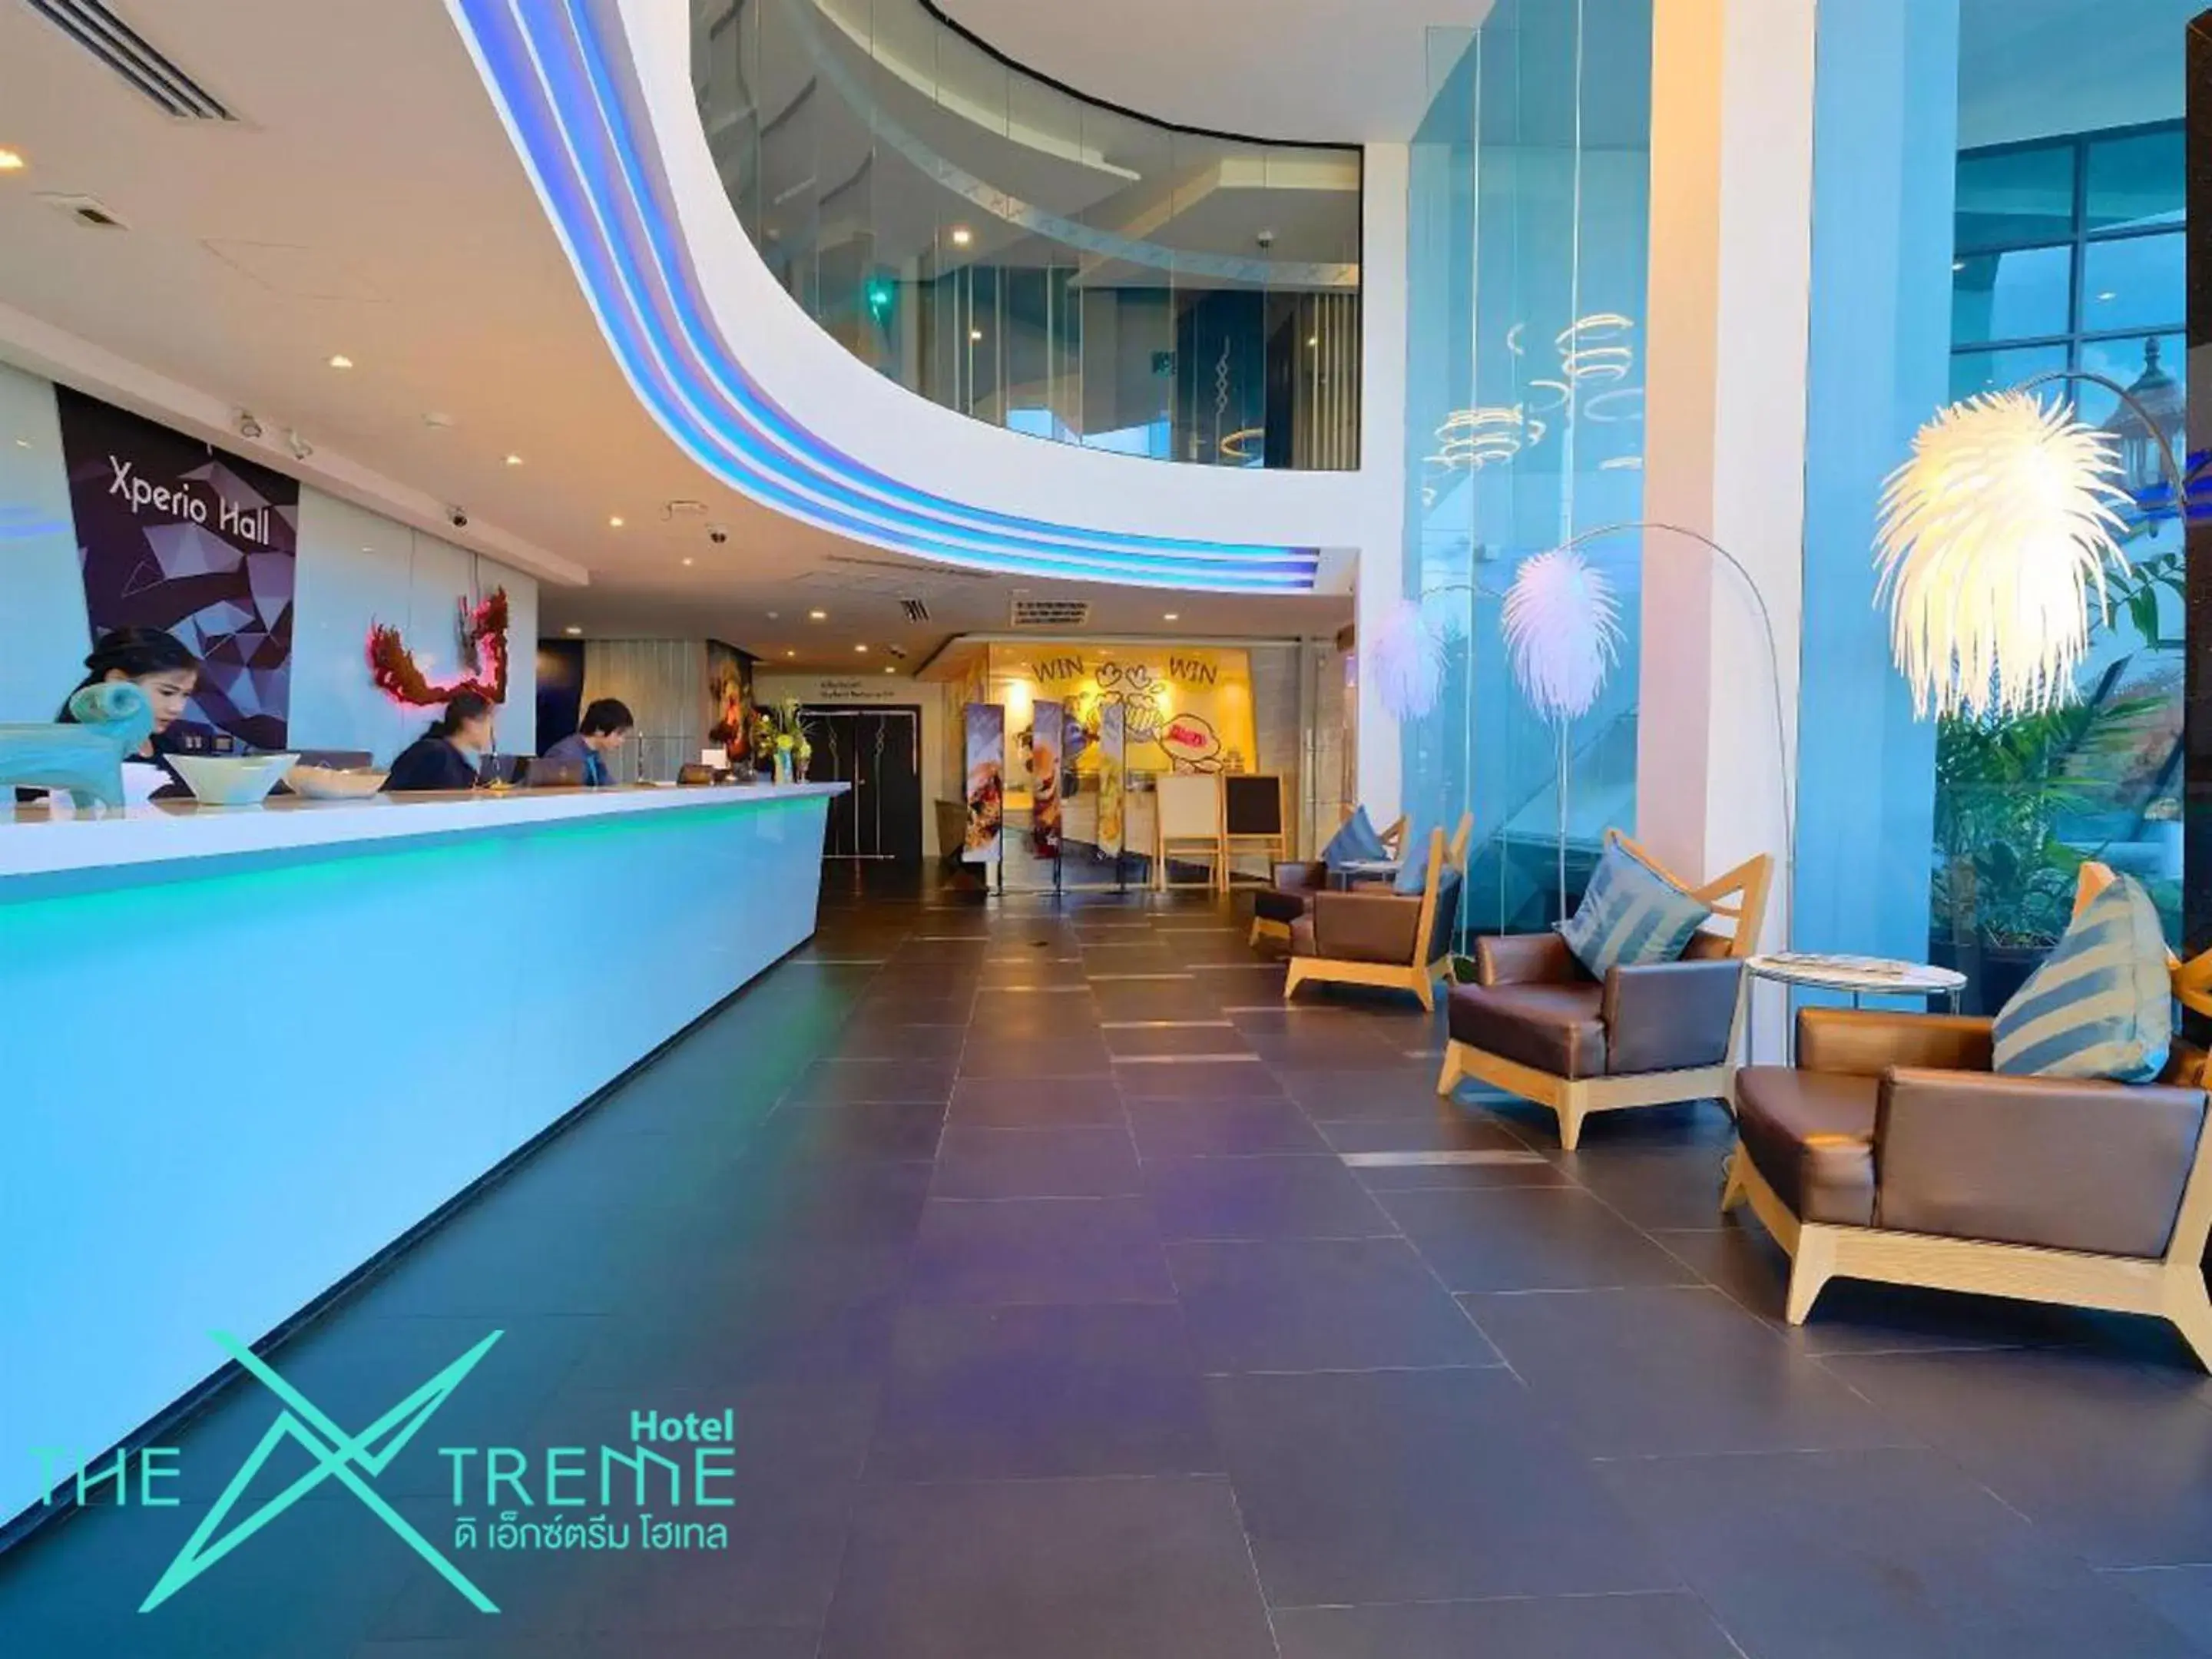 On site, Lobby/Reception in The Xtreme Hotel